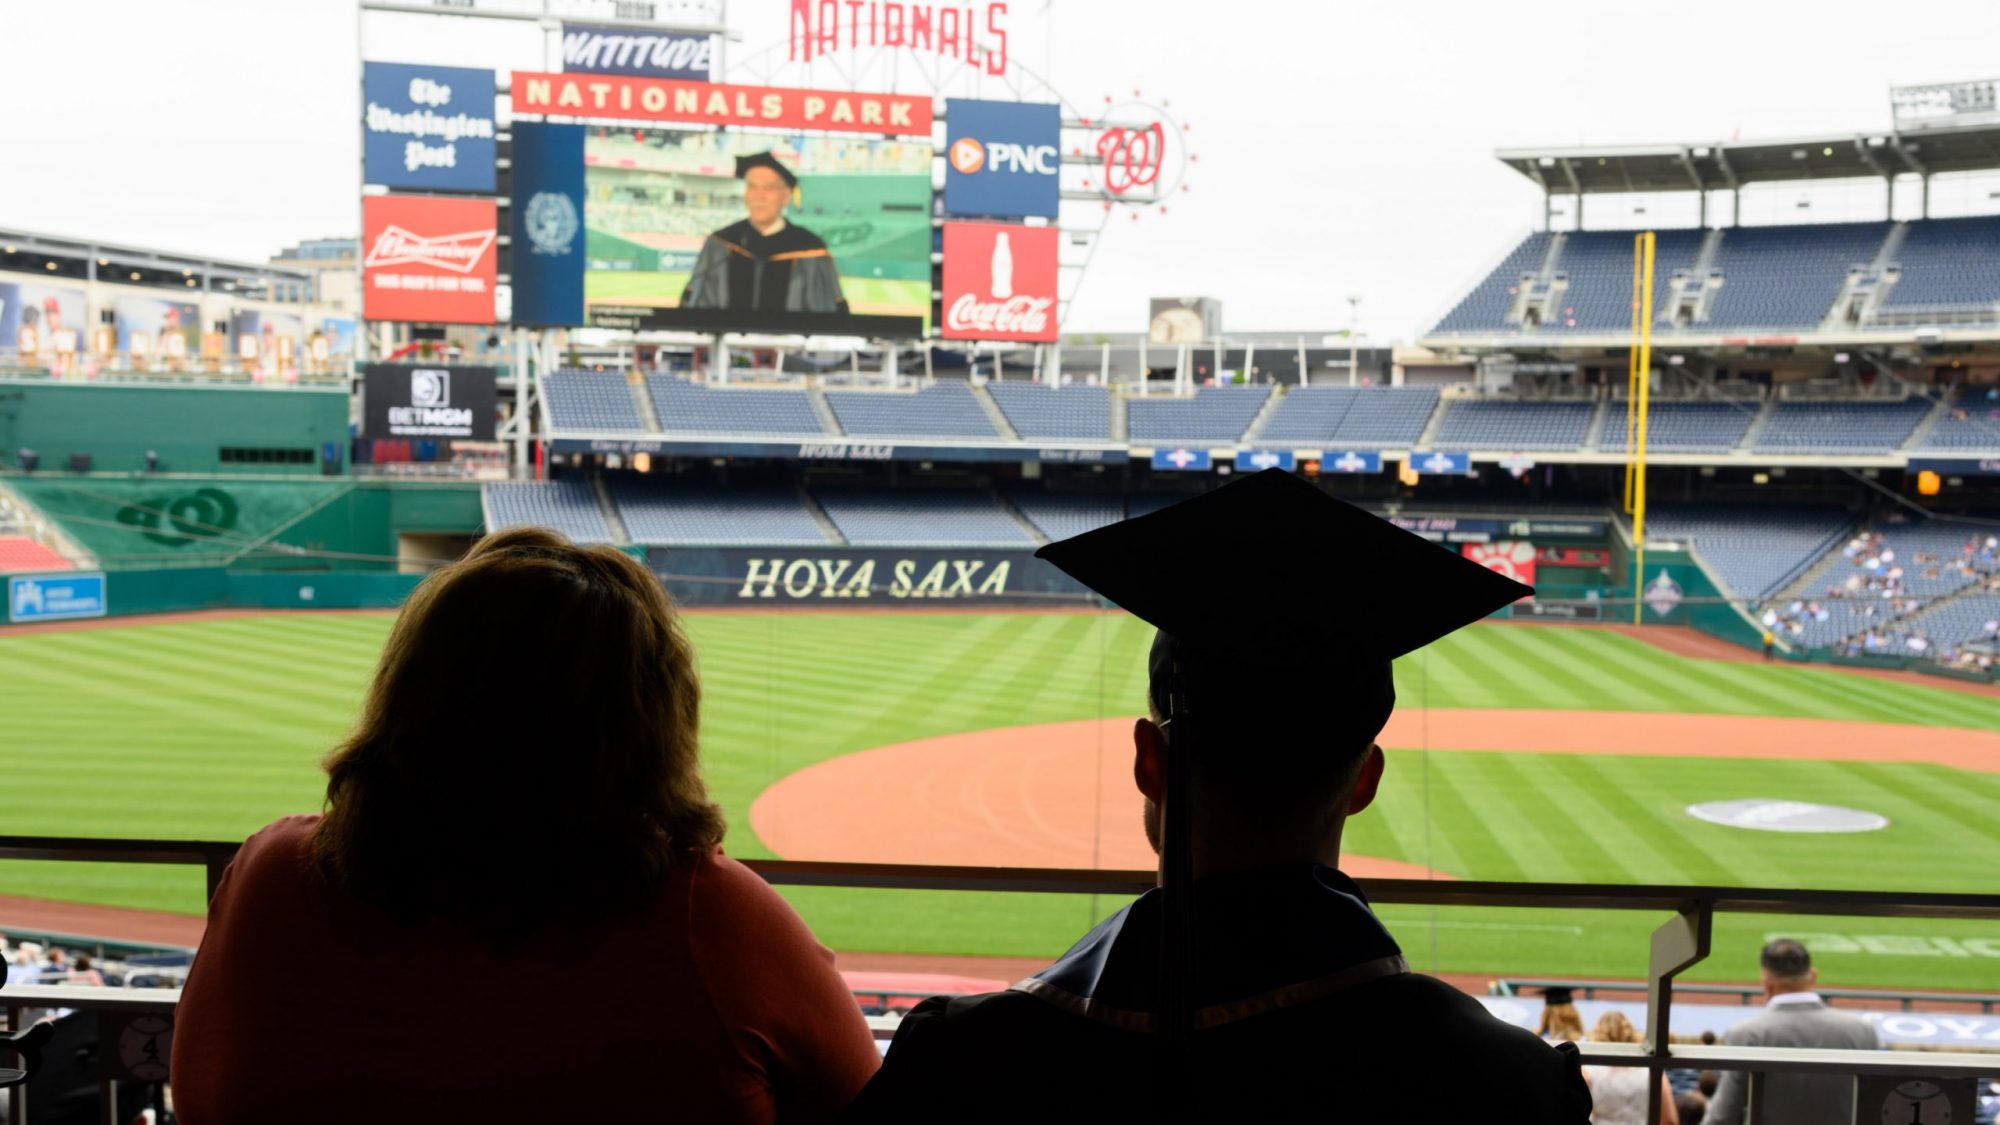 A graduating student and their guest look at Nats Park